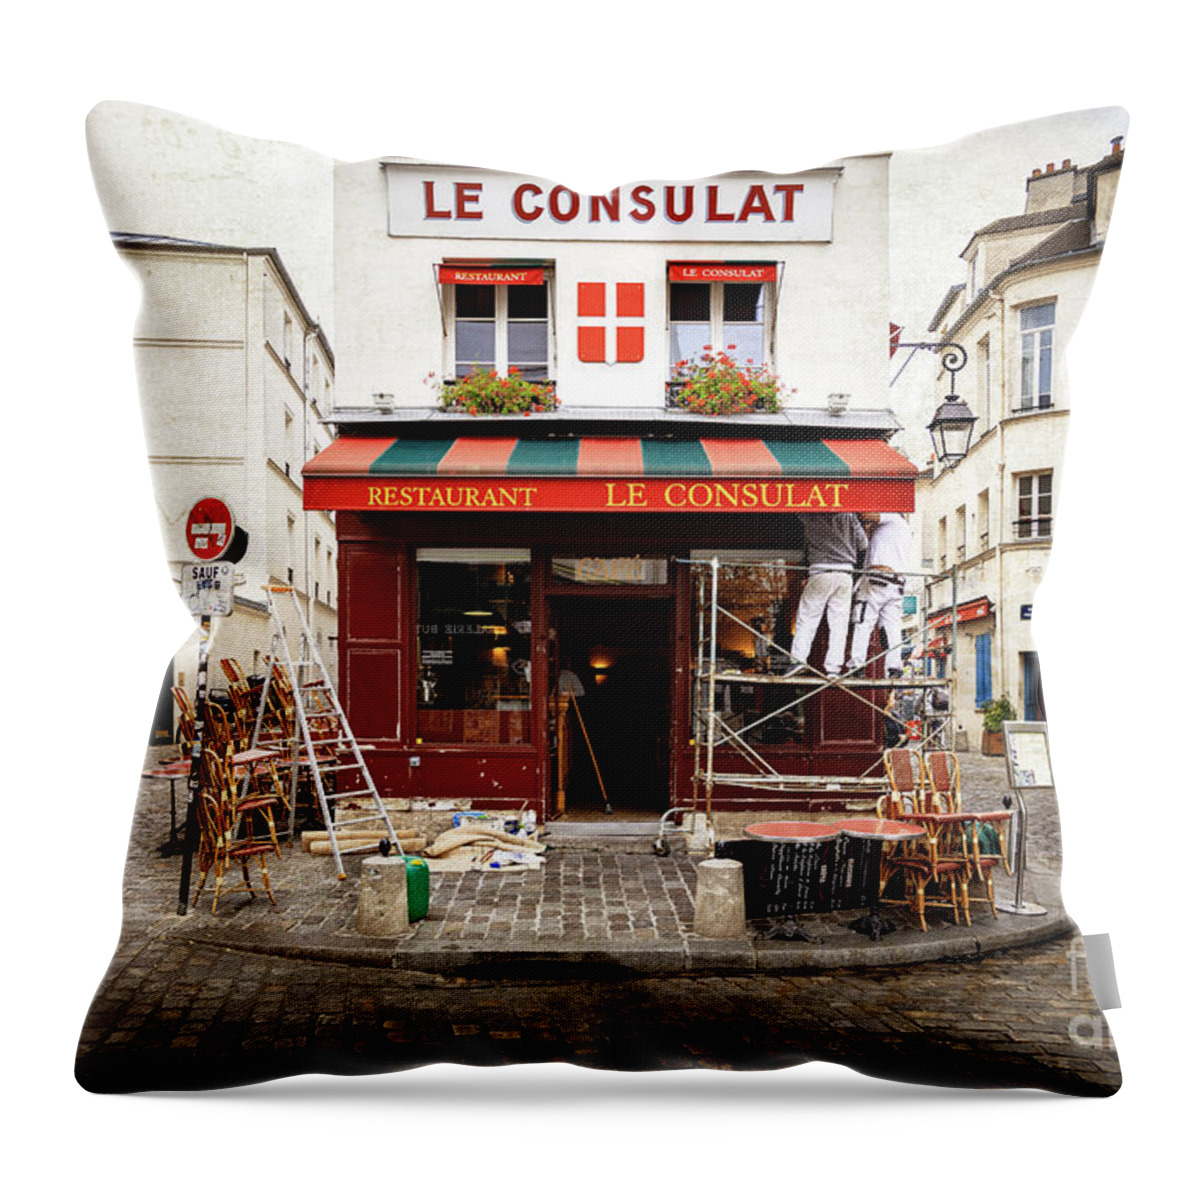 Aib_2018 # 1663 Throw Pillow featuring the photograph Le Consulat of Montmartre by Craig J Satterlee